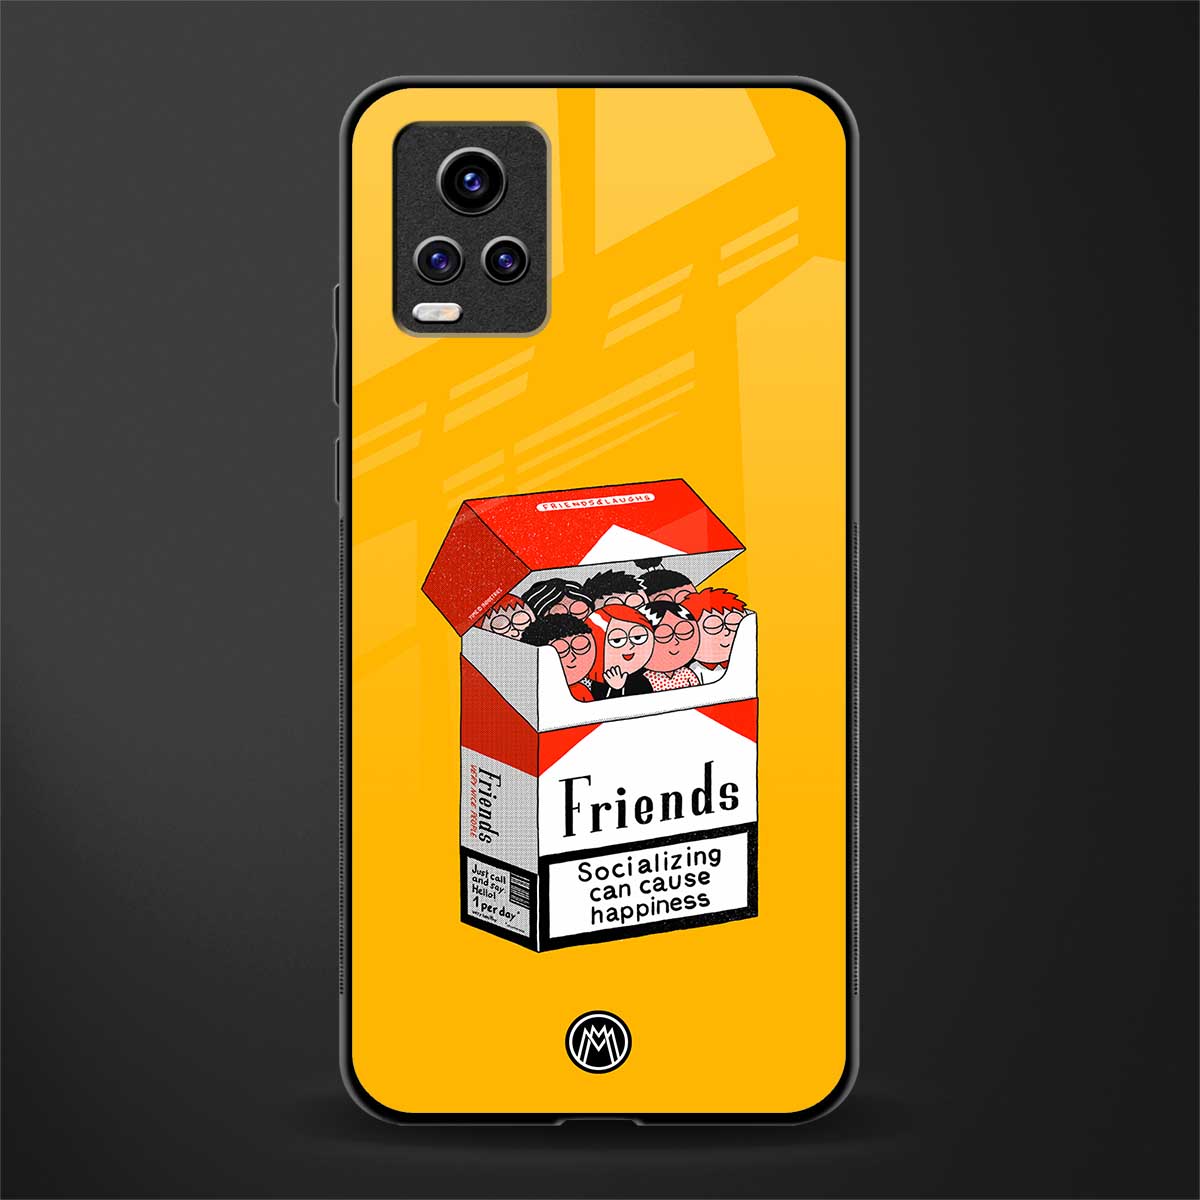 socializing can cause happiness back phone cover | glass case for vivo y73